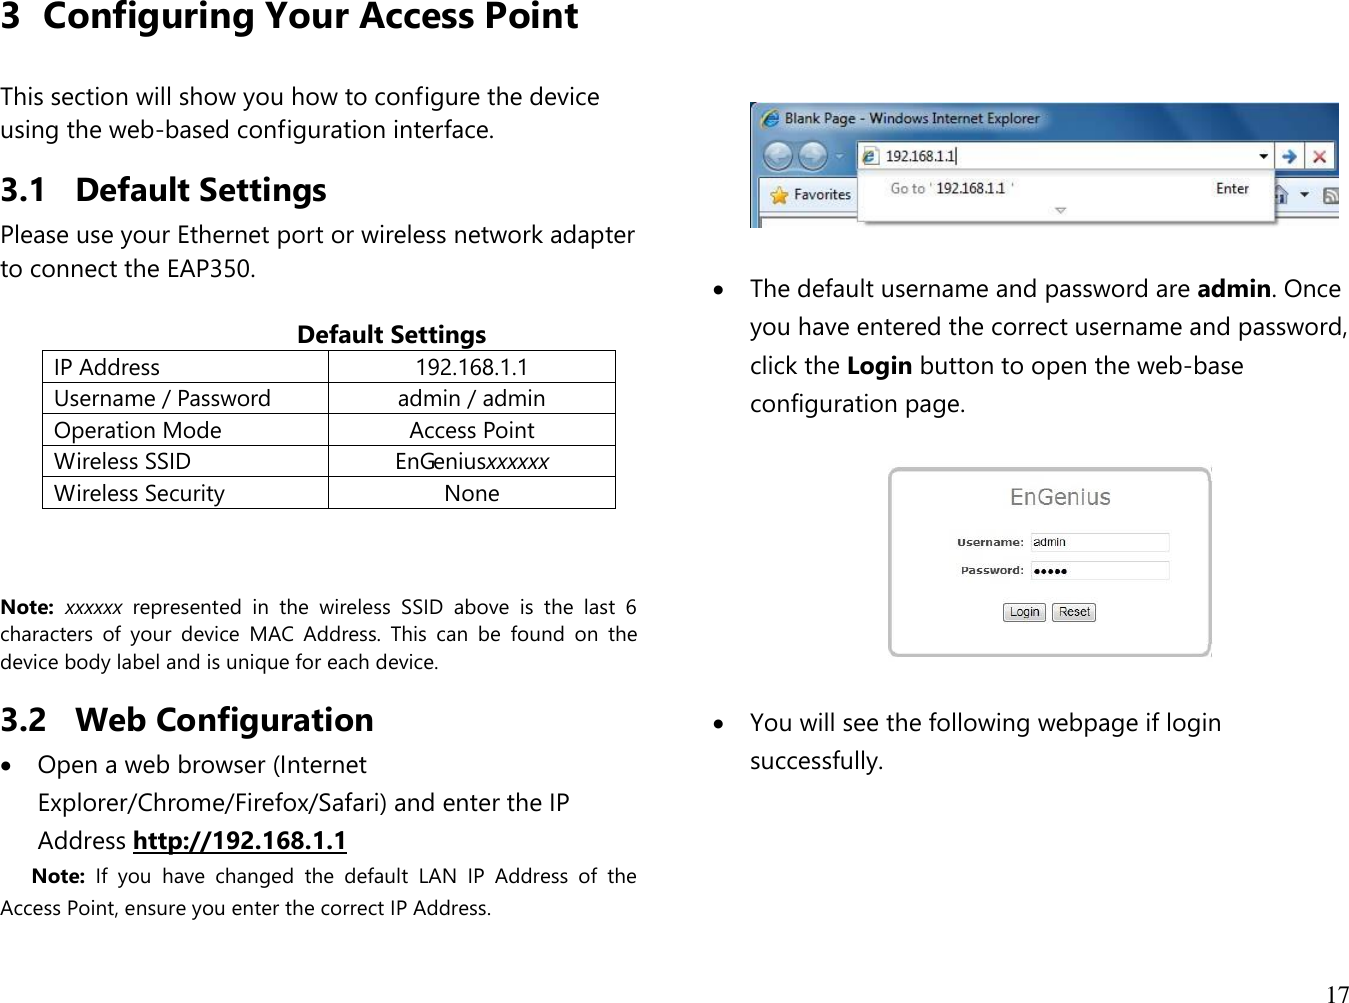 17  3 Configuring Your Access Point  This section will show you how to configure the device using the web-based configuration interface. 3.1 Default Settings Please use your Ethernet port or wireless network adapter to connect the EAP350.                                             Default Settings IP Address 192.168.1.1 Username / Password admin / admin Operation Mode Access Point Wireless SSID EnGeniusxxxxxx Wireless Security None    Note:  xxxxxx  represented  in  the  wireless  SSID  above  is  the  last  6 characters  of  your  device  MAC  Address.  This  can  be  found  on  the device body label and is unique for each device. 3.2 Web Configuration  Open a web browser (Internet Explorer/Chrome/Firefox/Safari) and enter the IP Address http://192.168.1.1 Note:  If  you  have  changed  the  default  LAN  IP  Address  of  the Access Point, ensure you enter the correct IP Address.        The default username and password are admin. Once you have entered the correct username and password, click the Login button to open the web-base configuration page.     You will see the following webpage if login successfully. 